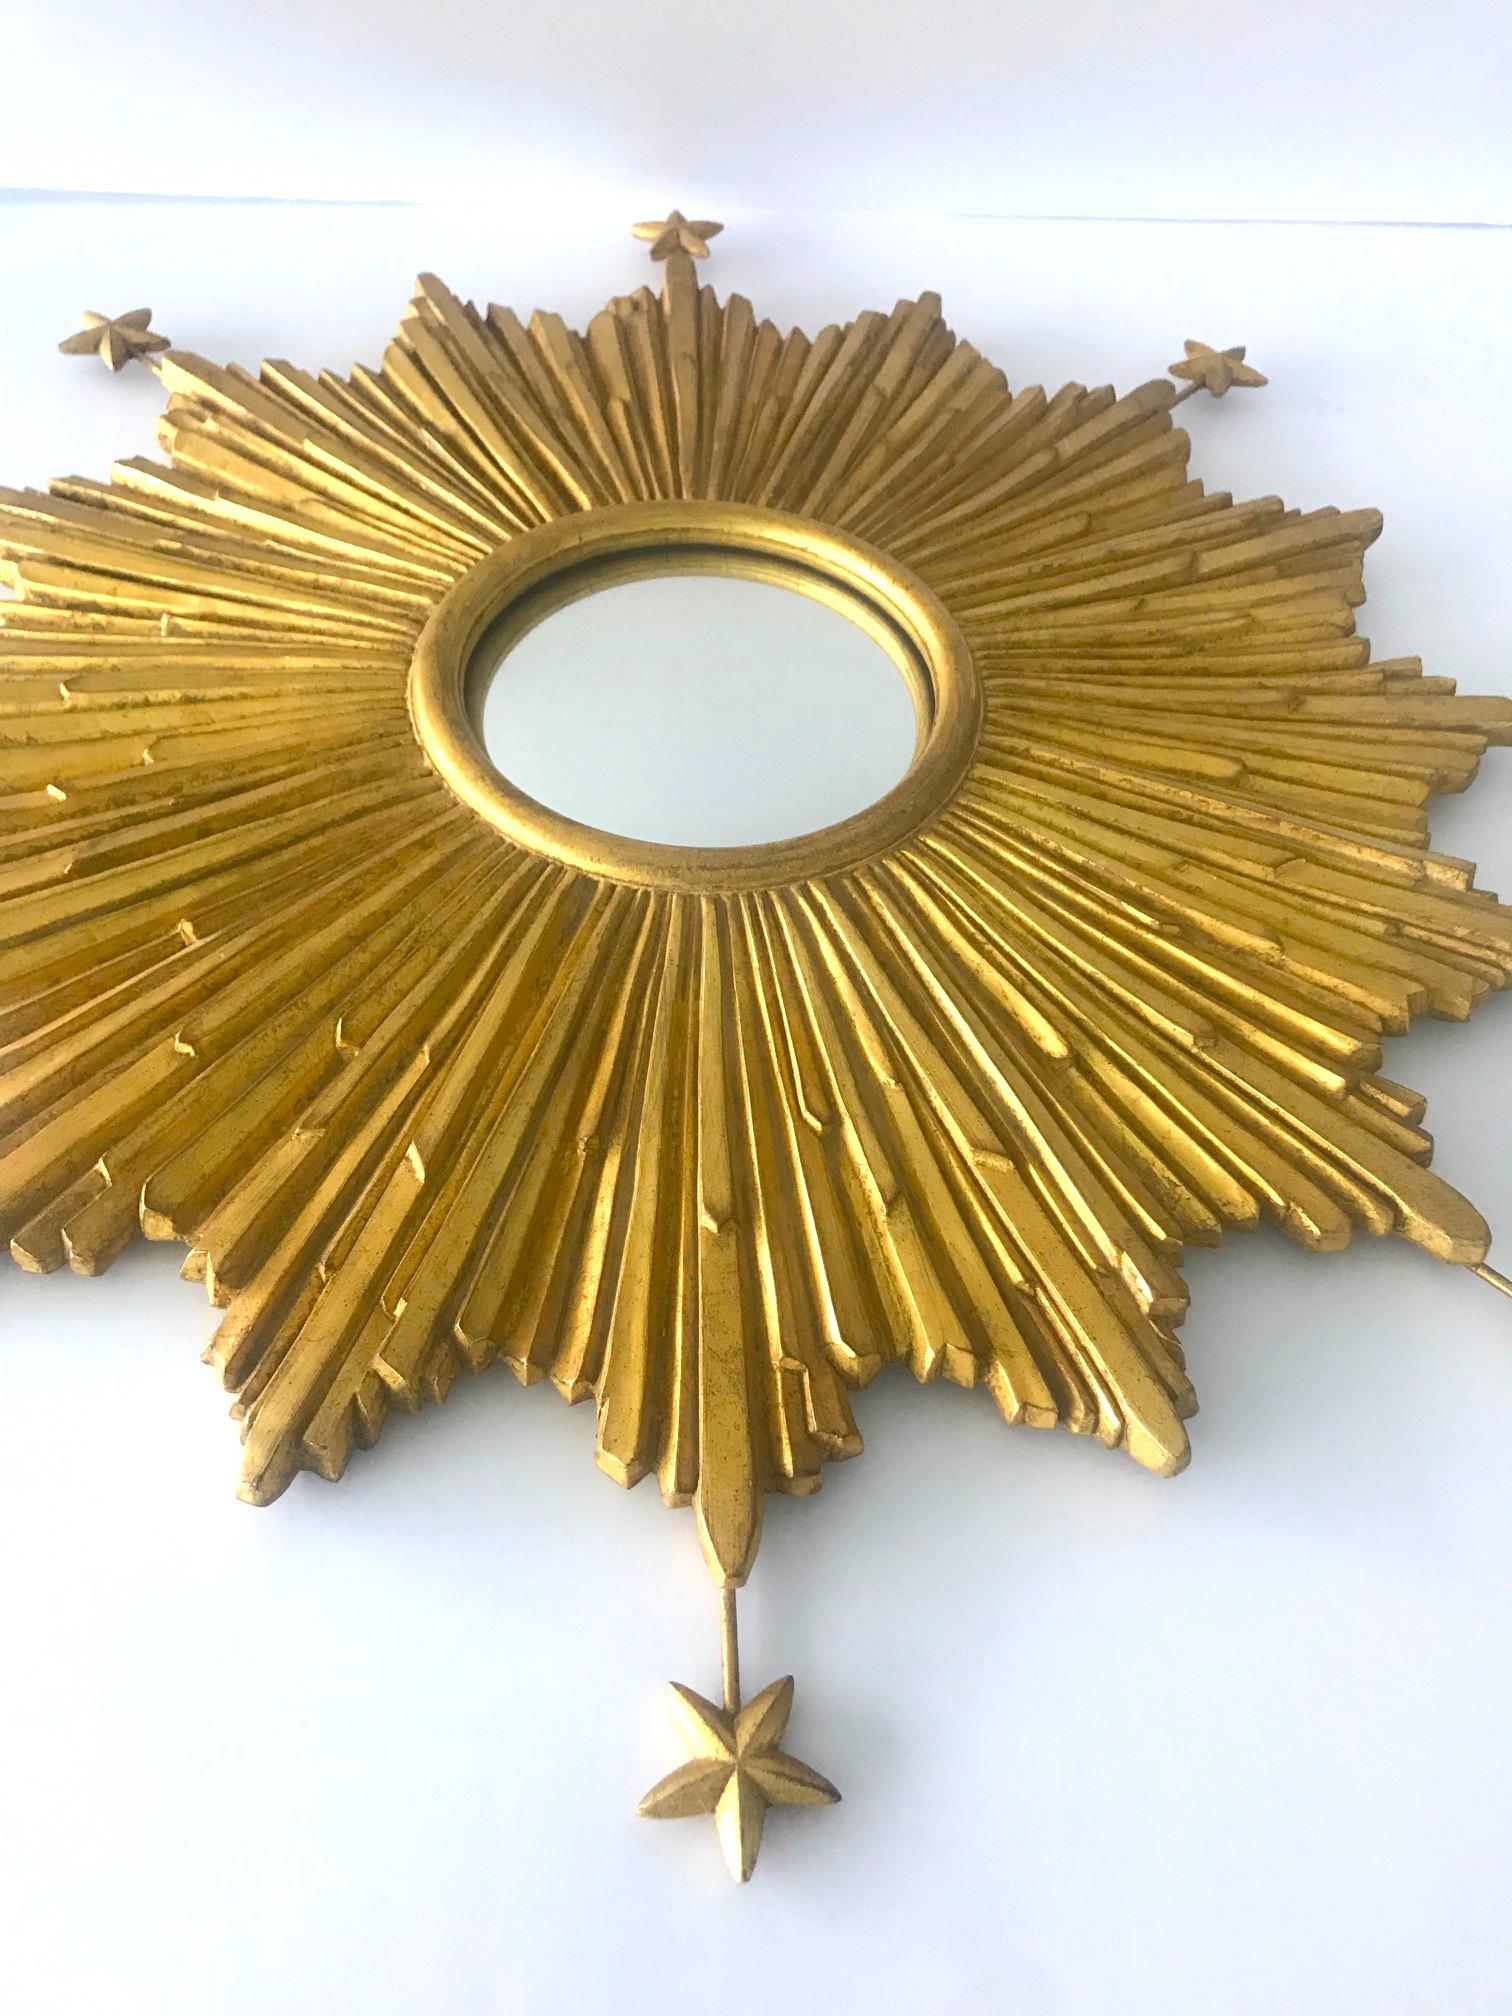 European Exceptional Starburst Mirror Hand Carved with Antique Gold Leaf Finish